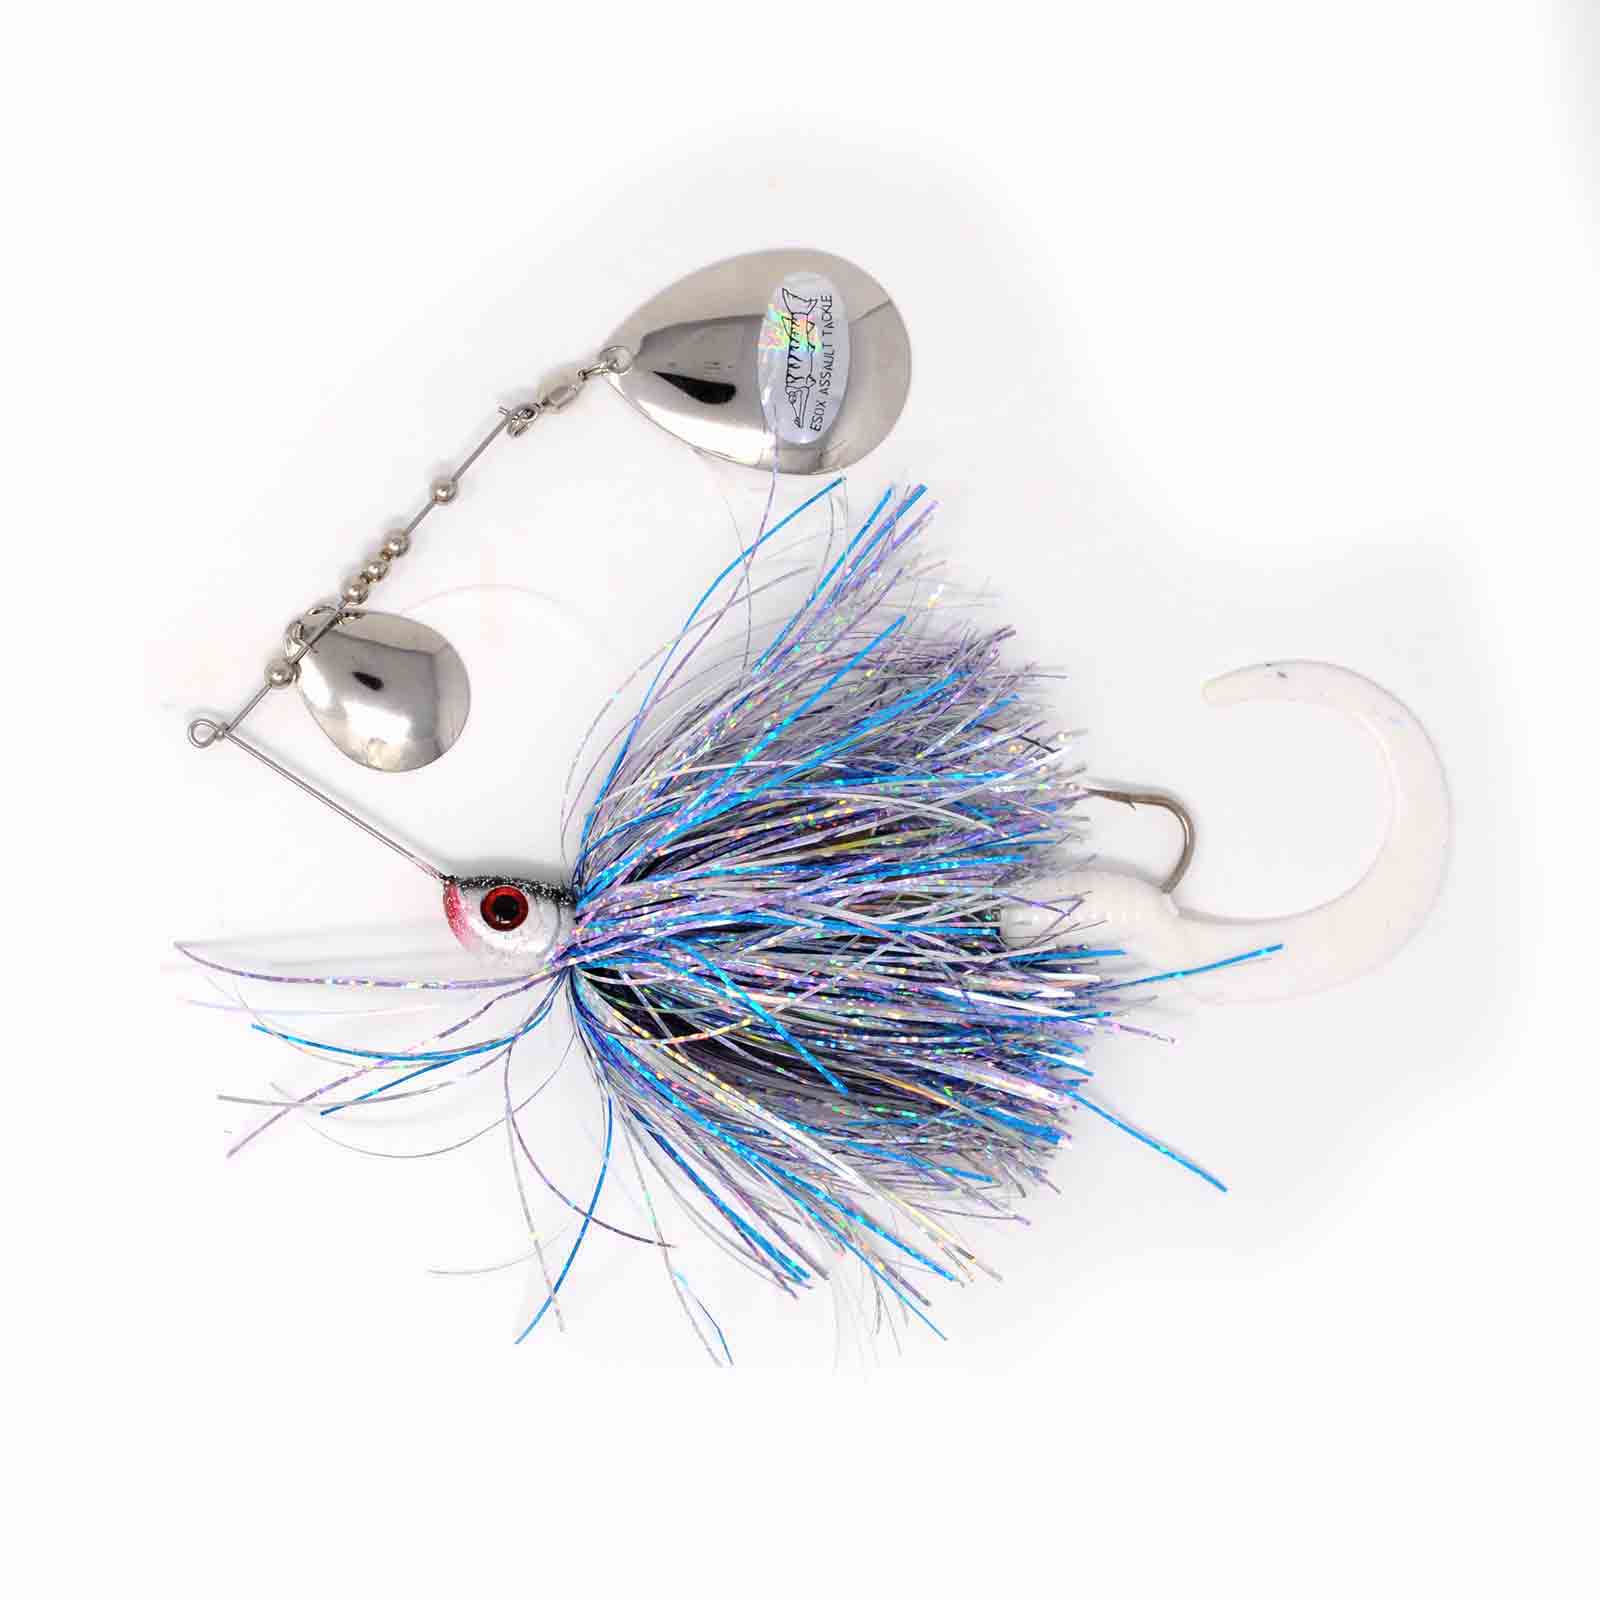 View of Spinnerbaits Esox Assault Spinnerbait Colorado 1oz Shimmer Shad available at EZOKO Pike and Musky Shop